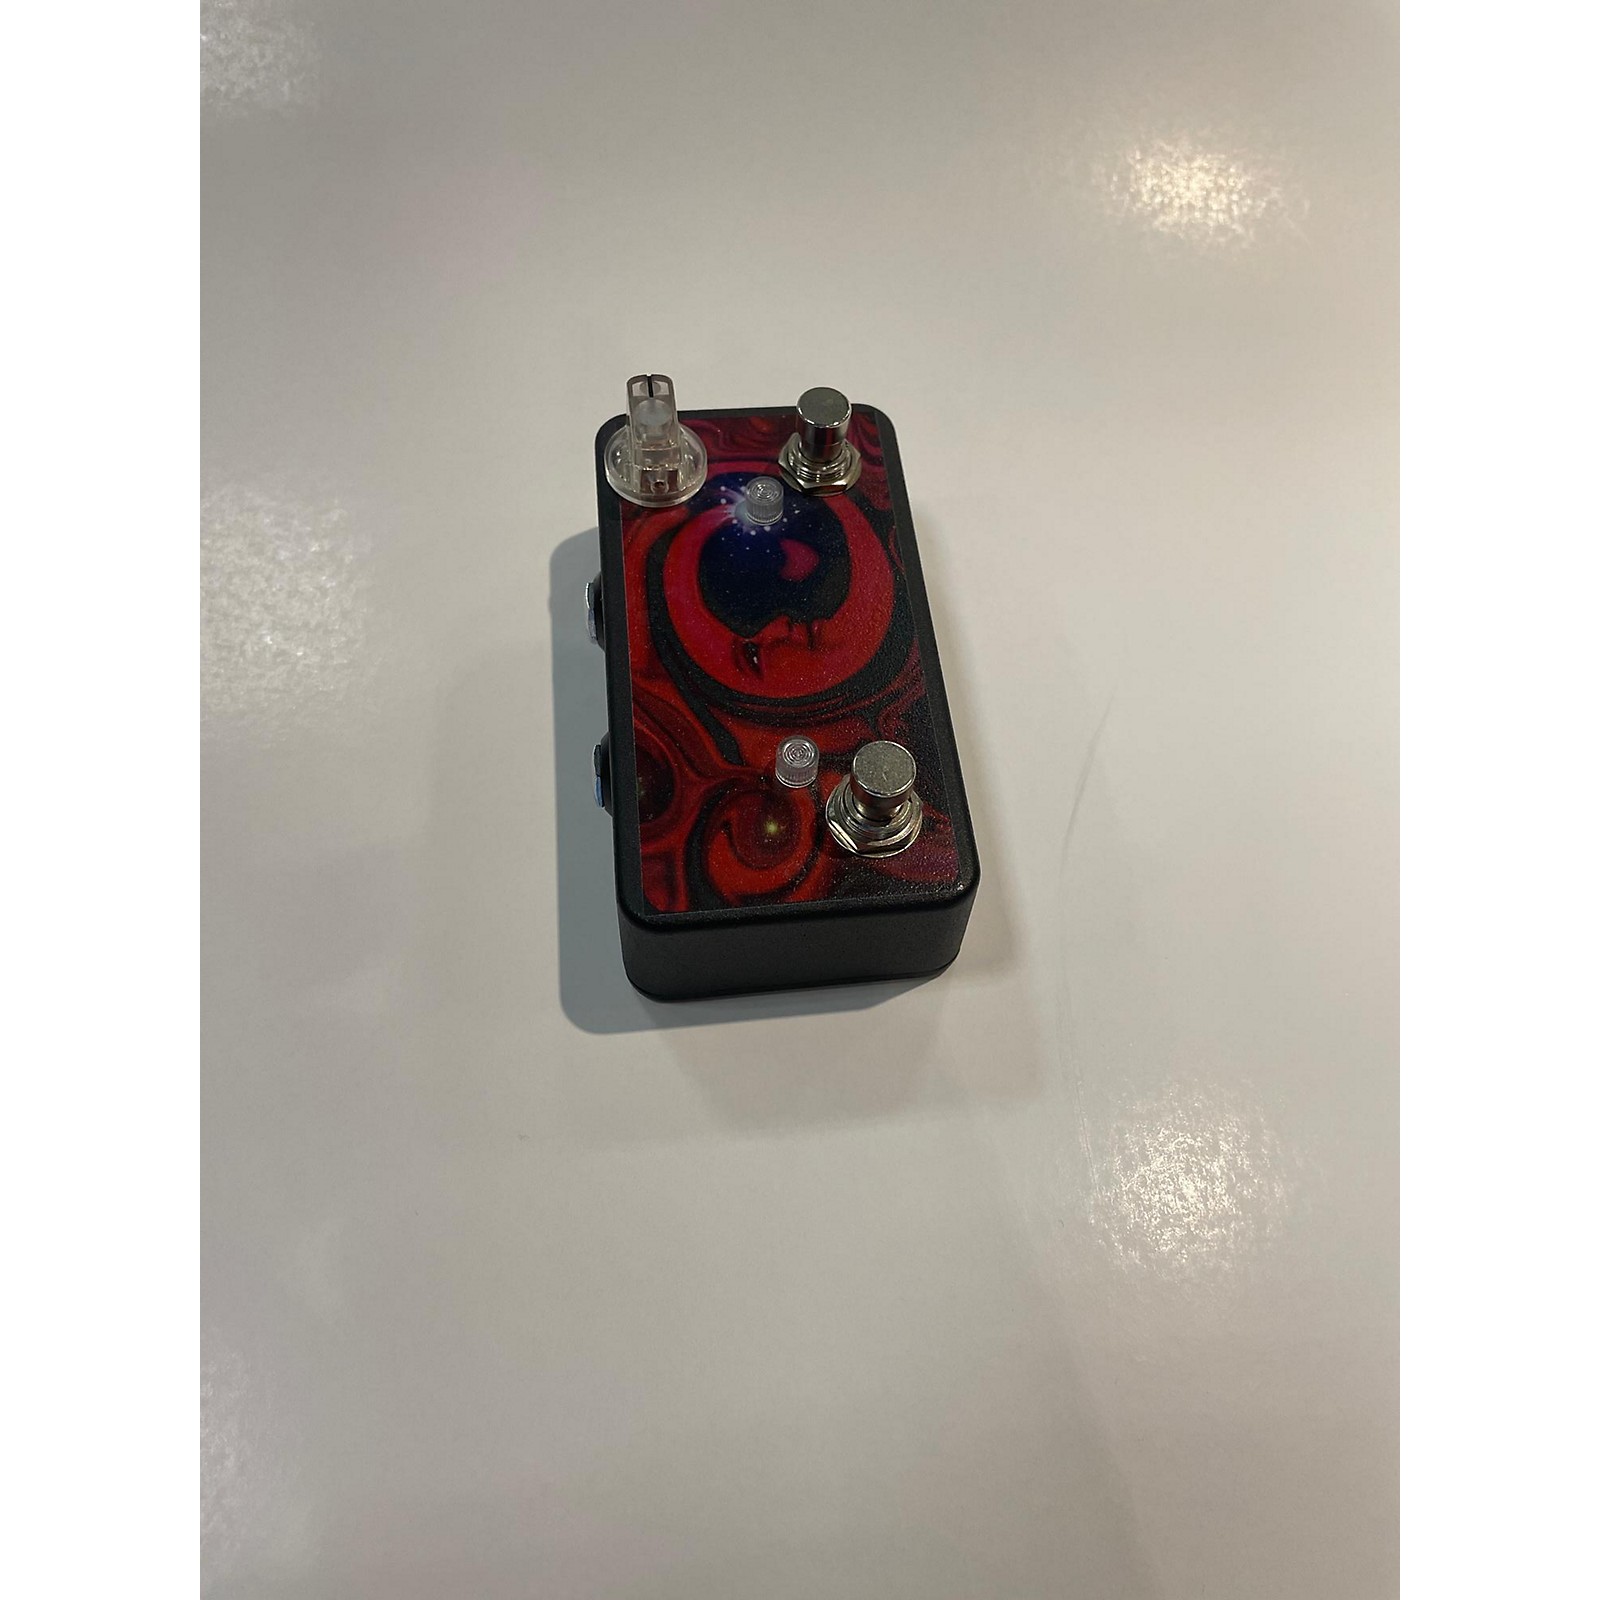 Used Lovepedal Red Moon Tchula Effect Pedal